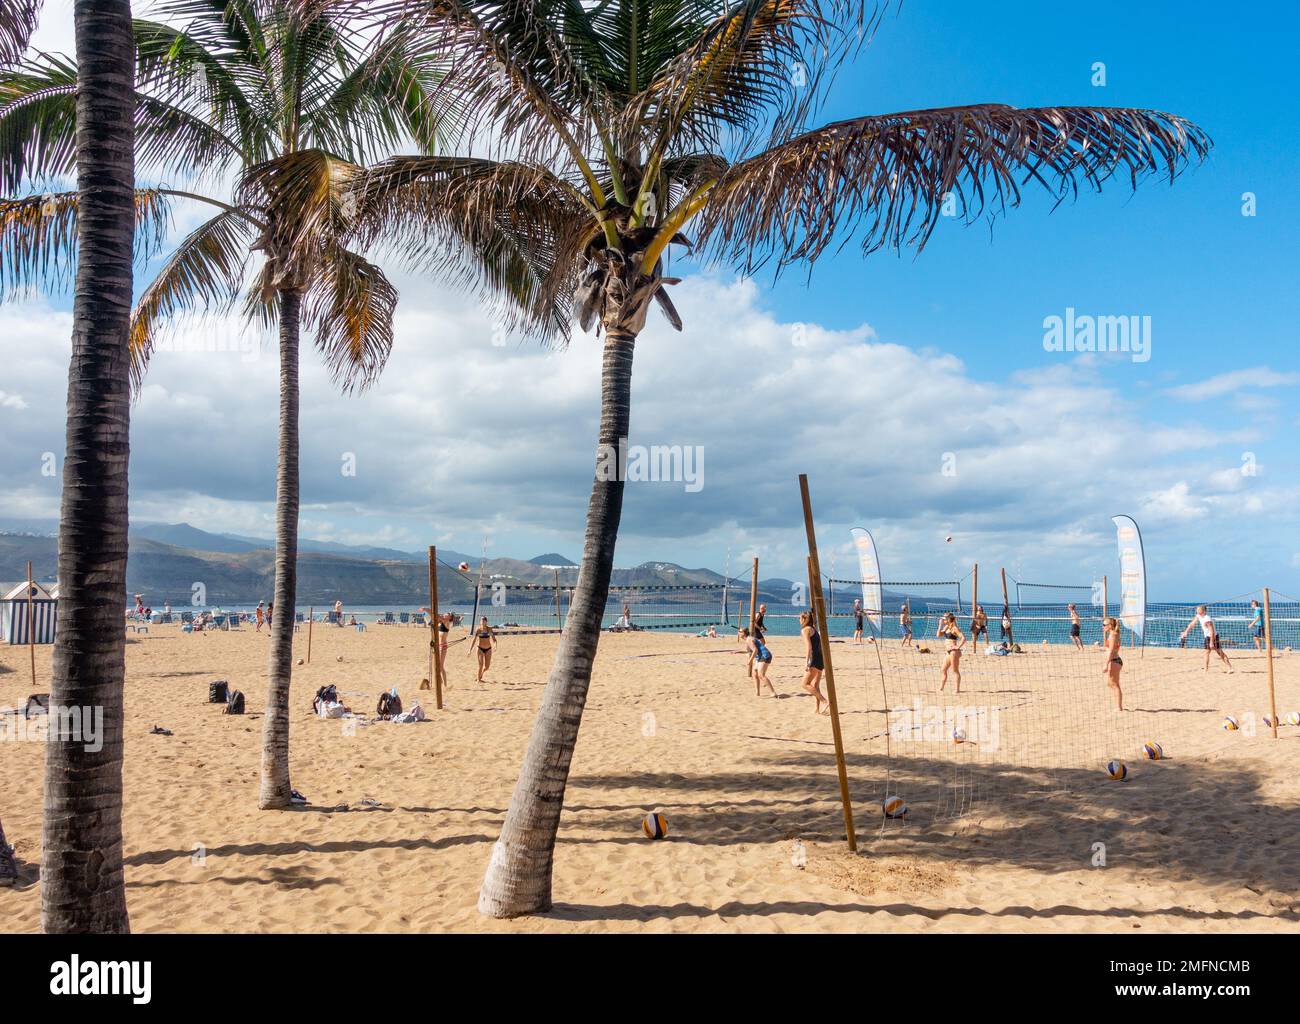 Las Palmas, Gran Canaria, Canary Islands, Spain. 25th January 2023.  Tourists, many from the UK, bask in glorious sunshine on the city beach in Las Palmas. The Canary Islands are a popular winter sun destination for thousands of British holidaymakers. Credit: Alan Dawson/Alamy Live News Stock Photo